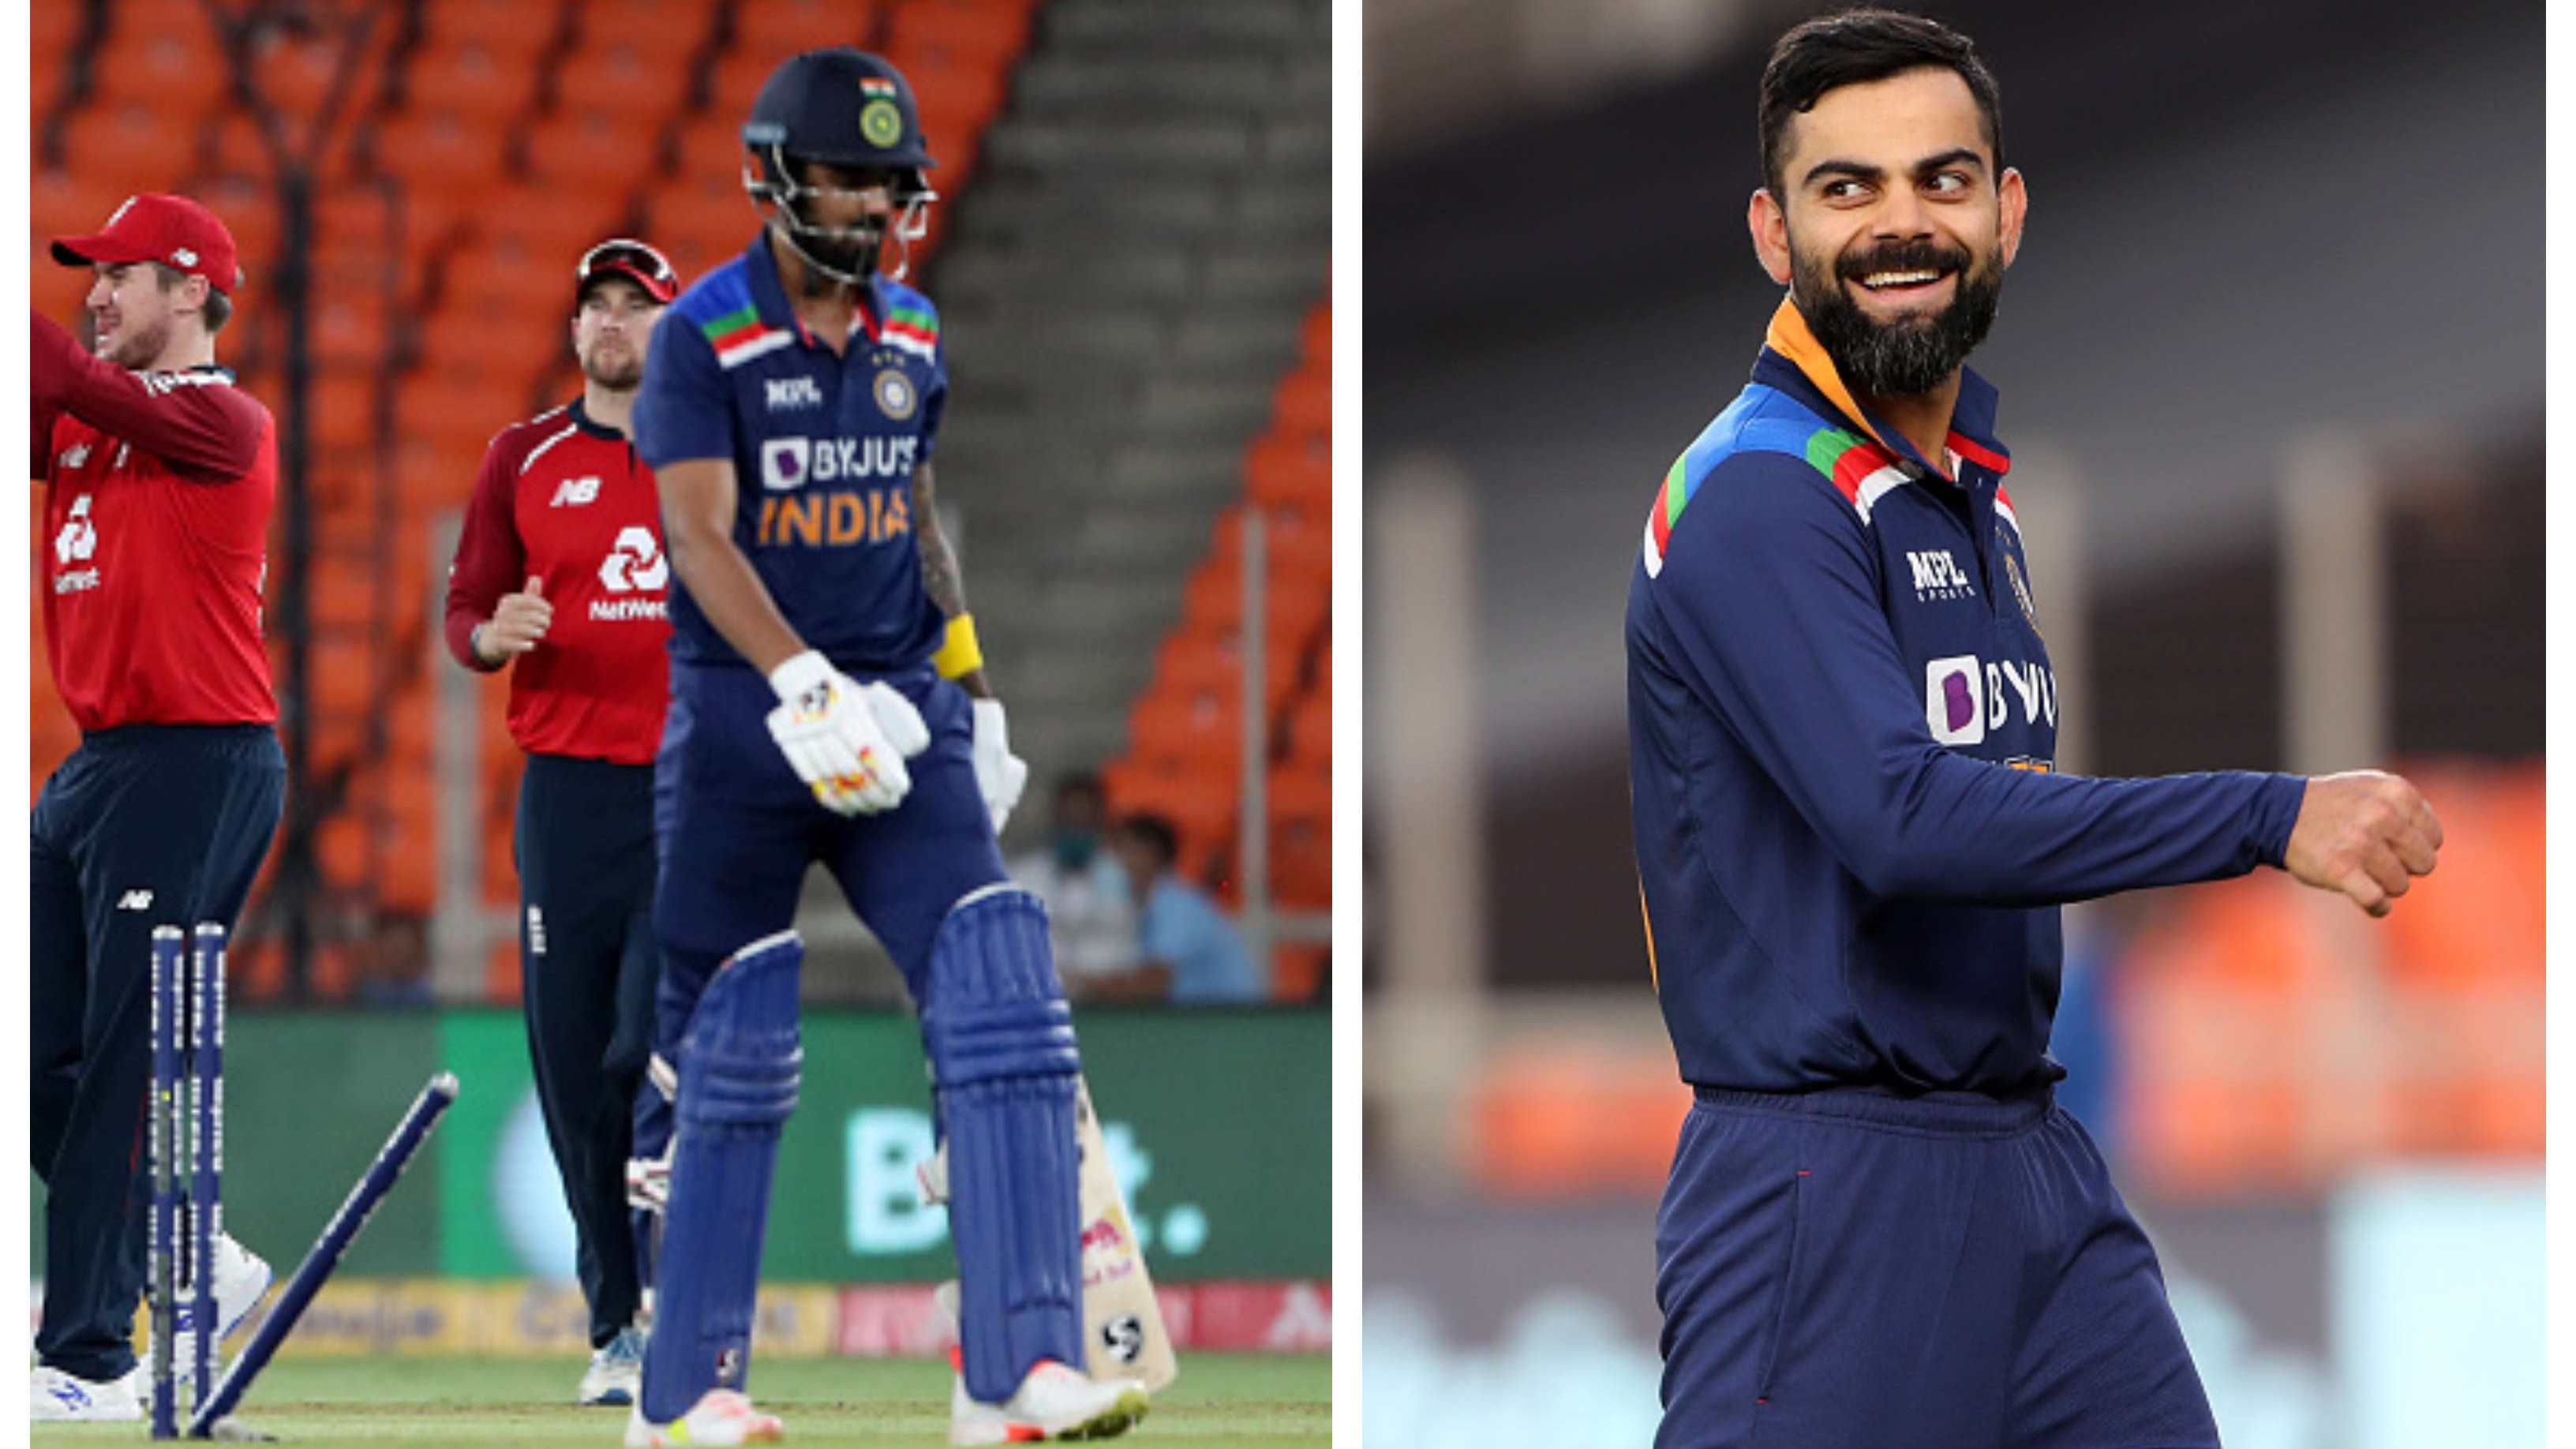 IND v ENG 2021: ‘He has been a champion player’, Virat Kohli backs struggling KL Rahul to do well in upcoming games